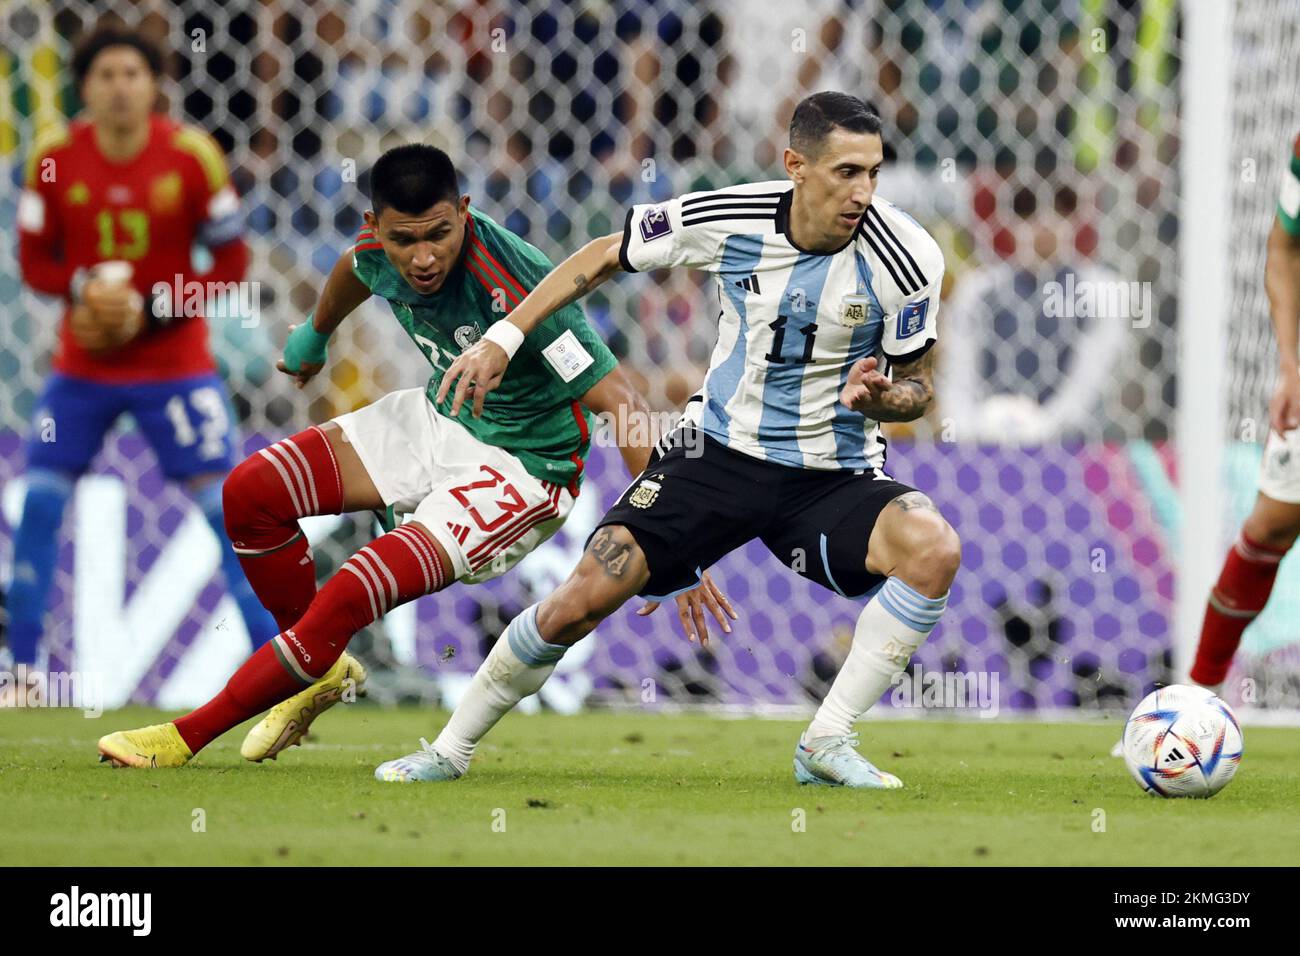 LUSAIL CITY - (l-r) Jesus Gallardo of Mexico, Angel Di Maria of Argentina during the FIFA World Cup Qatar 2022 group C match between Argentina and Mexico at Lusail Stadium on November 26, 2022 in Lusail City, Qatar. AP | Dutch Height | MAURICE OF STONE Stock Photo